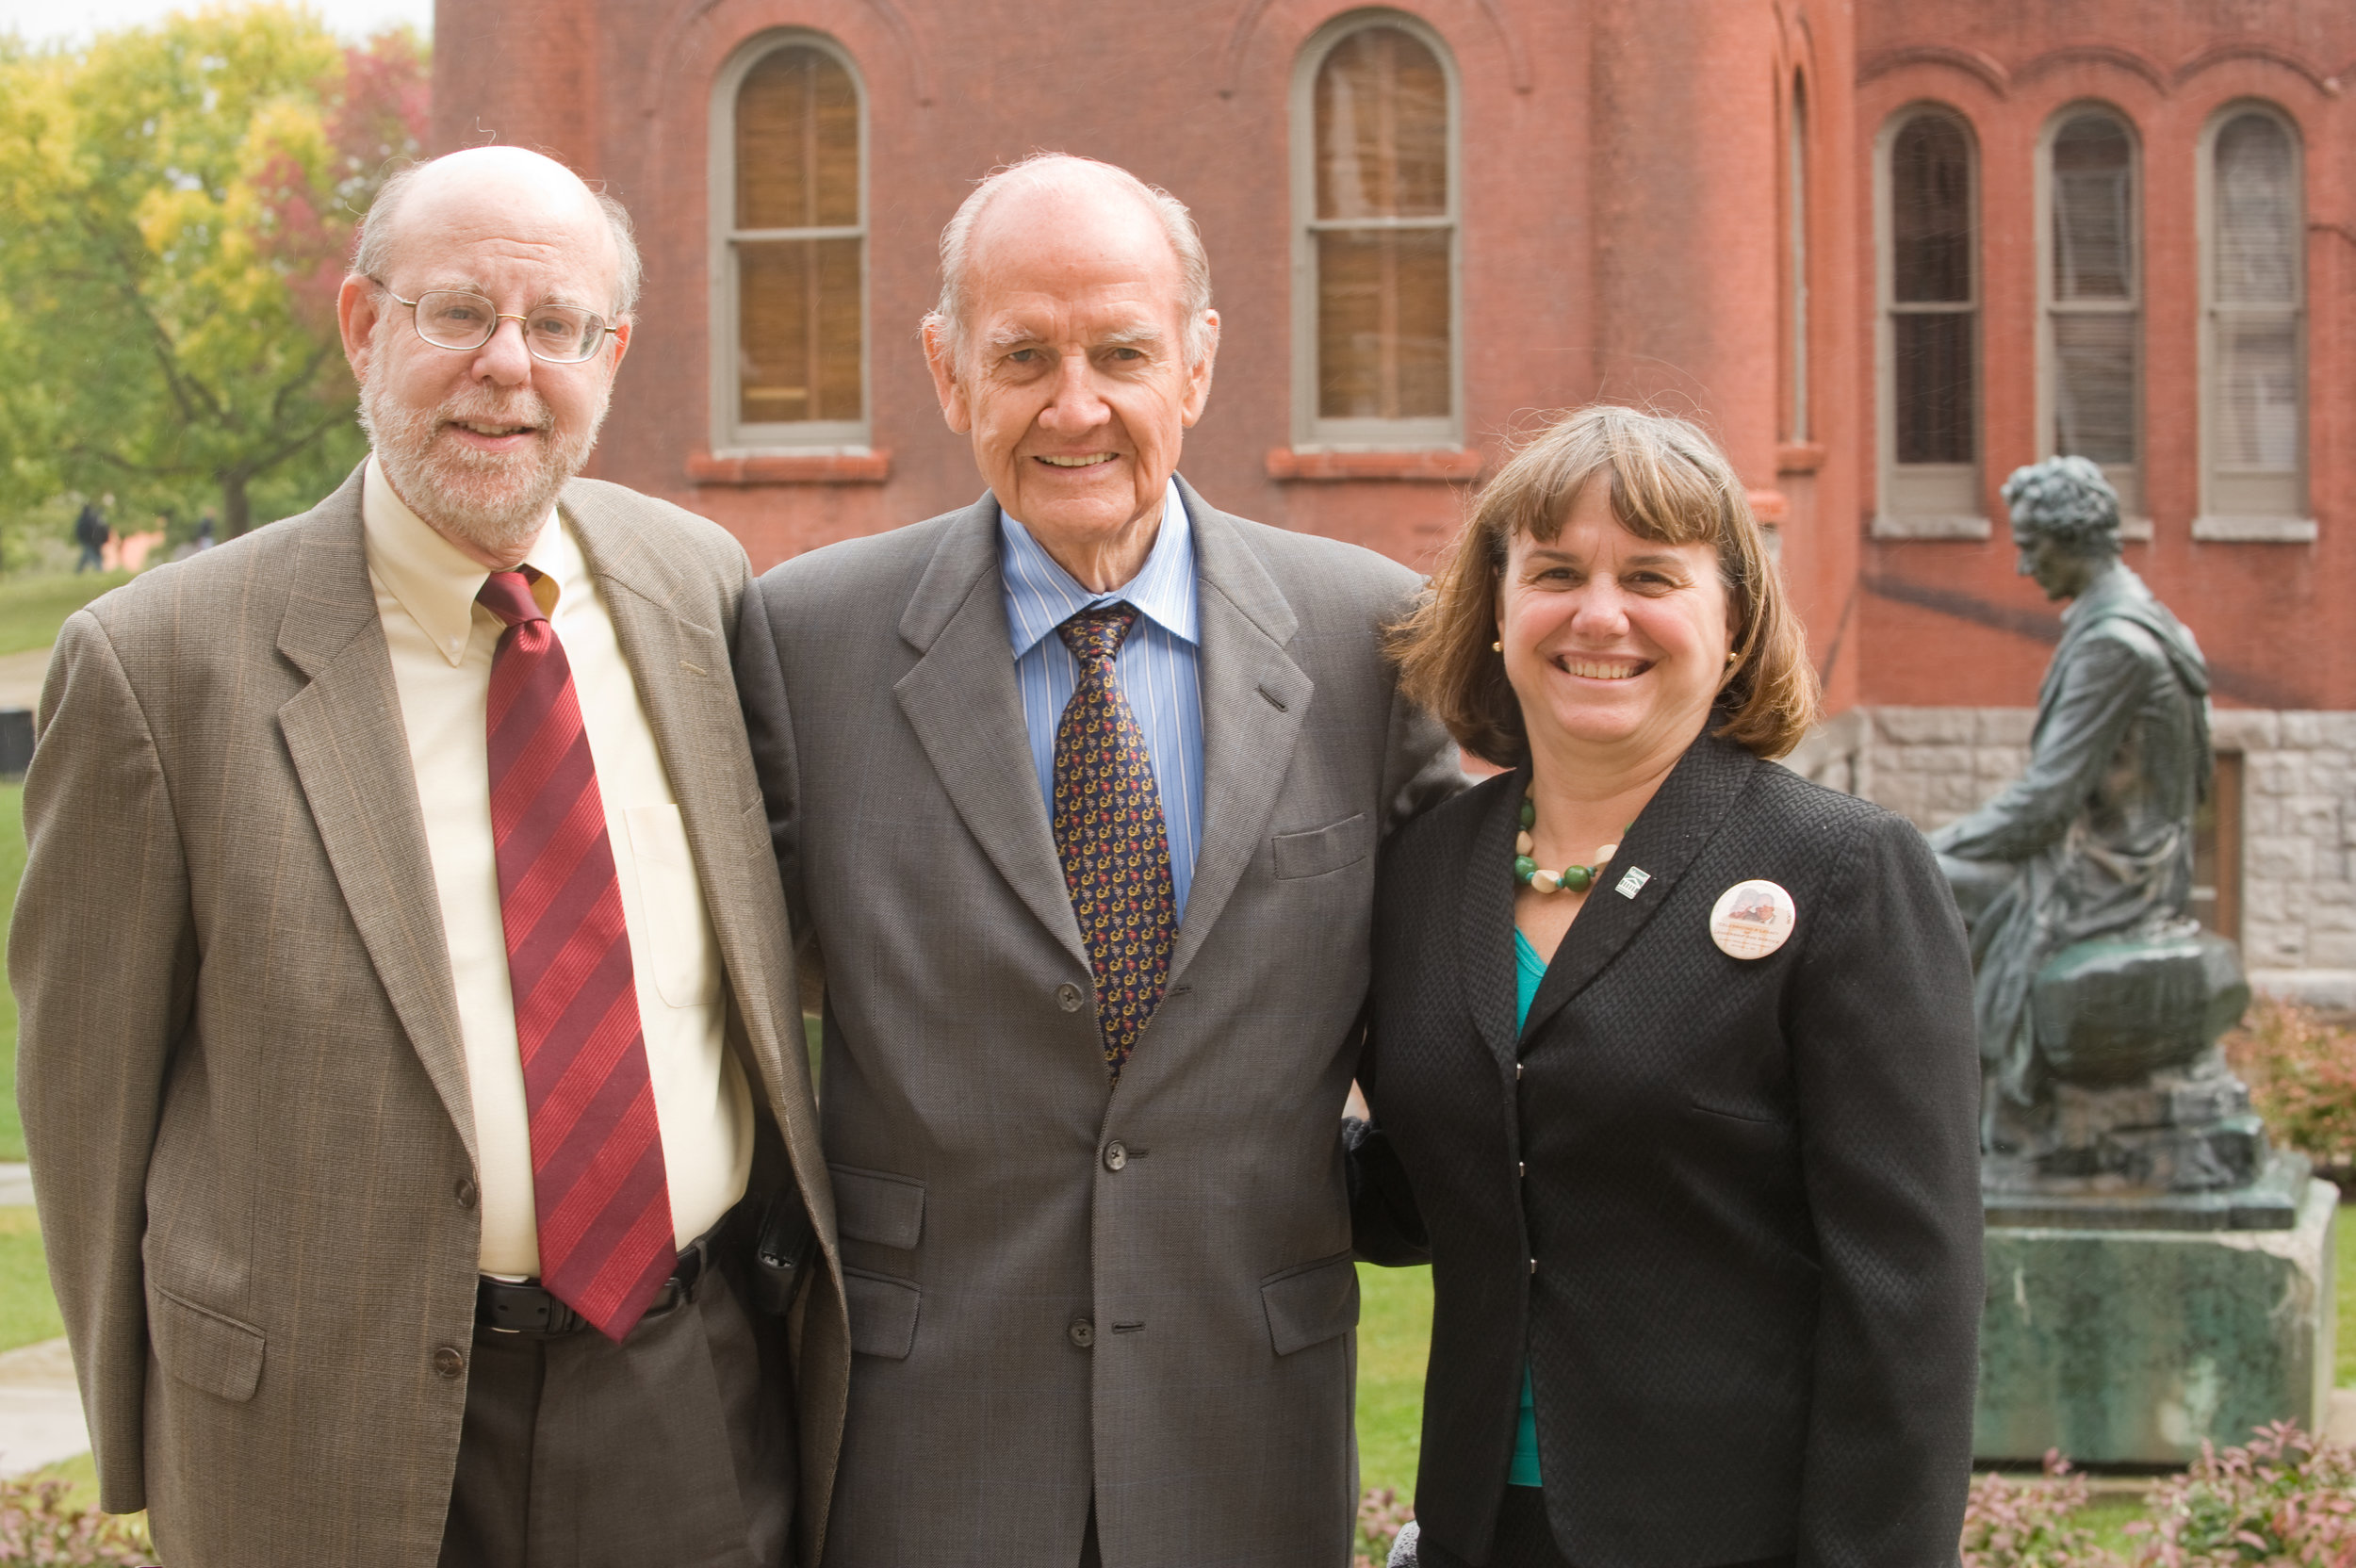  Catherine Bertini and PAIA Department Chair Stu Bretschneider welcoming Senator George McGovern to Maxwell after he had just written a book about Abraham Lincoln (2009) 